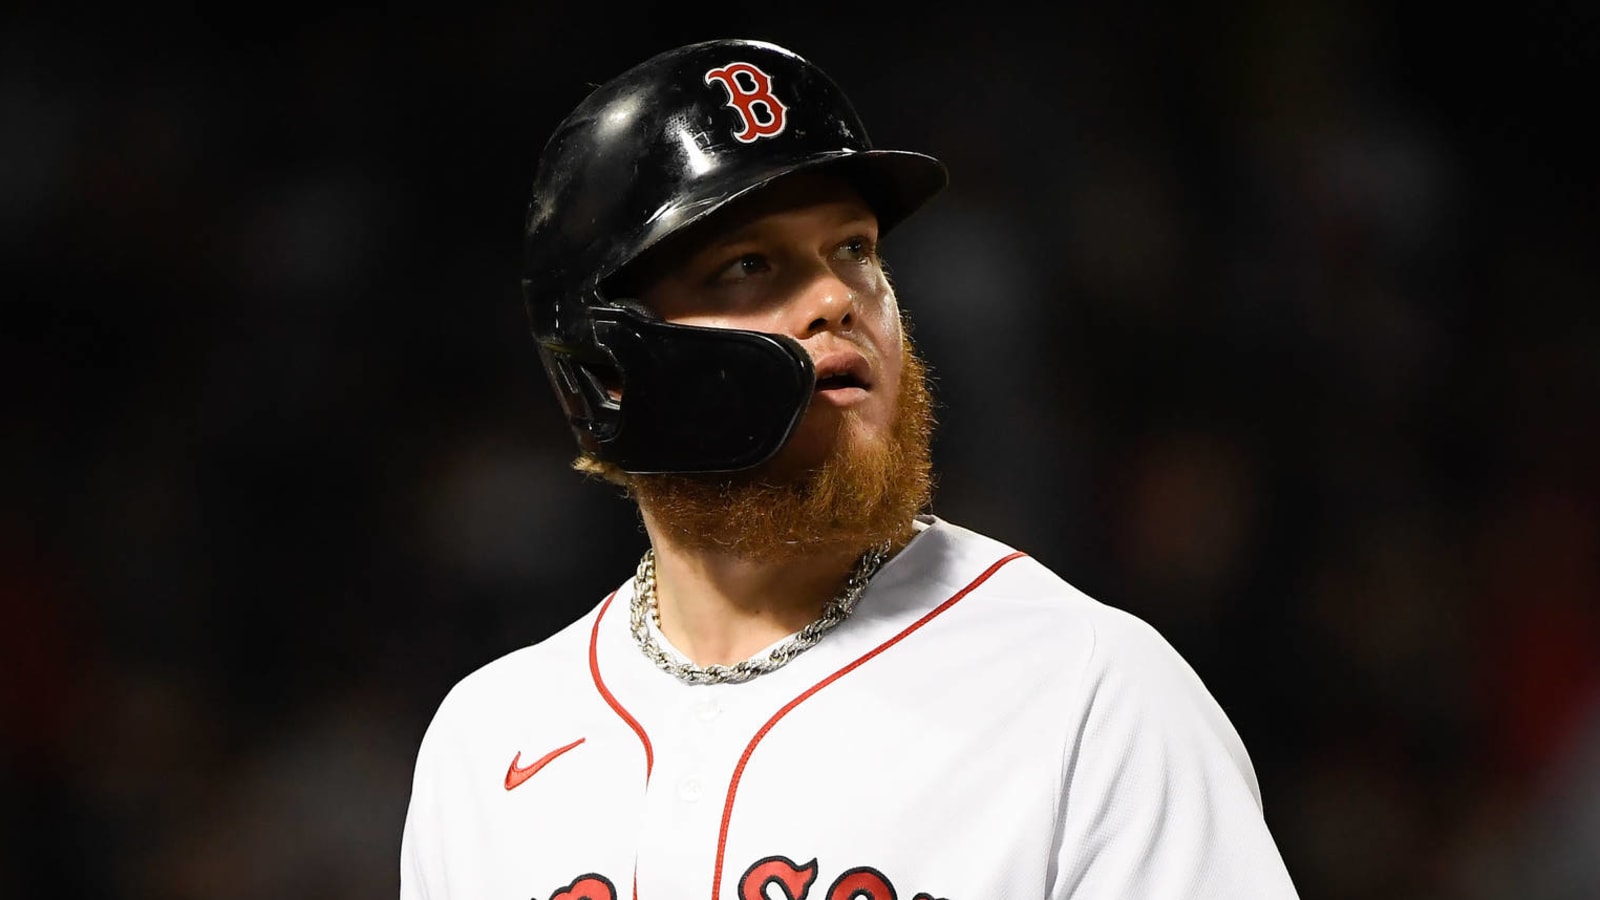 Continued offensive struggles doom Red Sox in 9-1 blowout loss